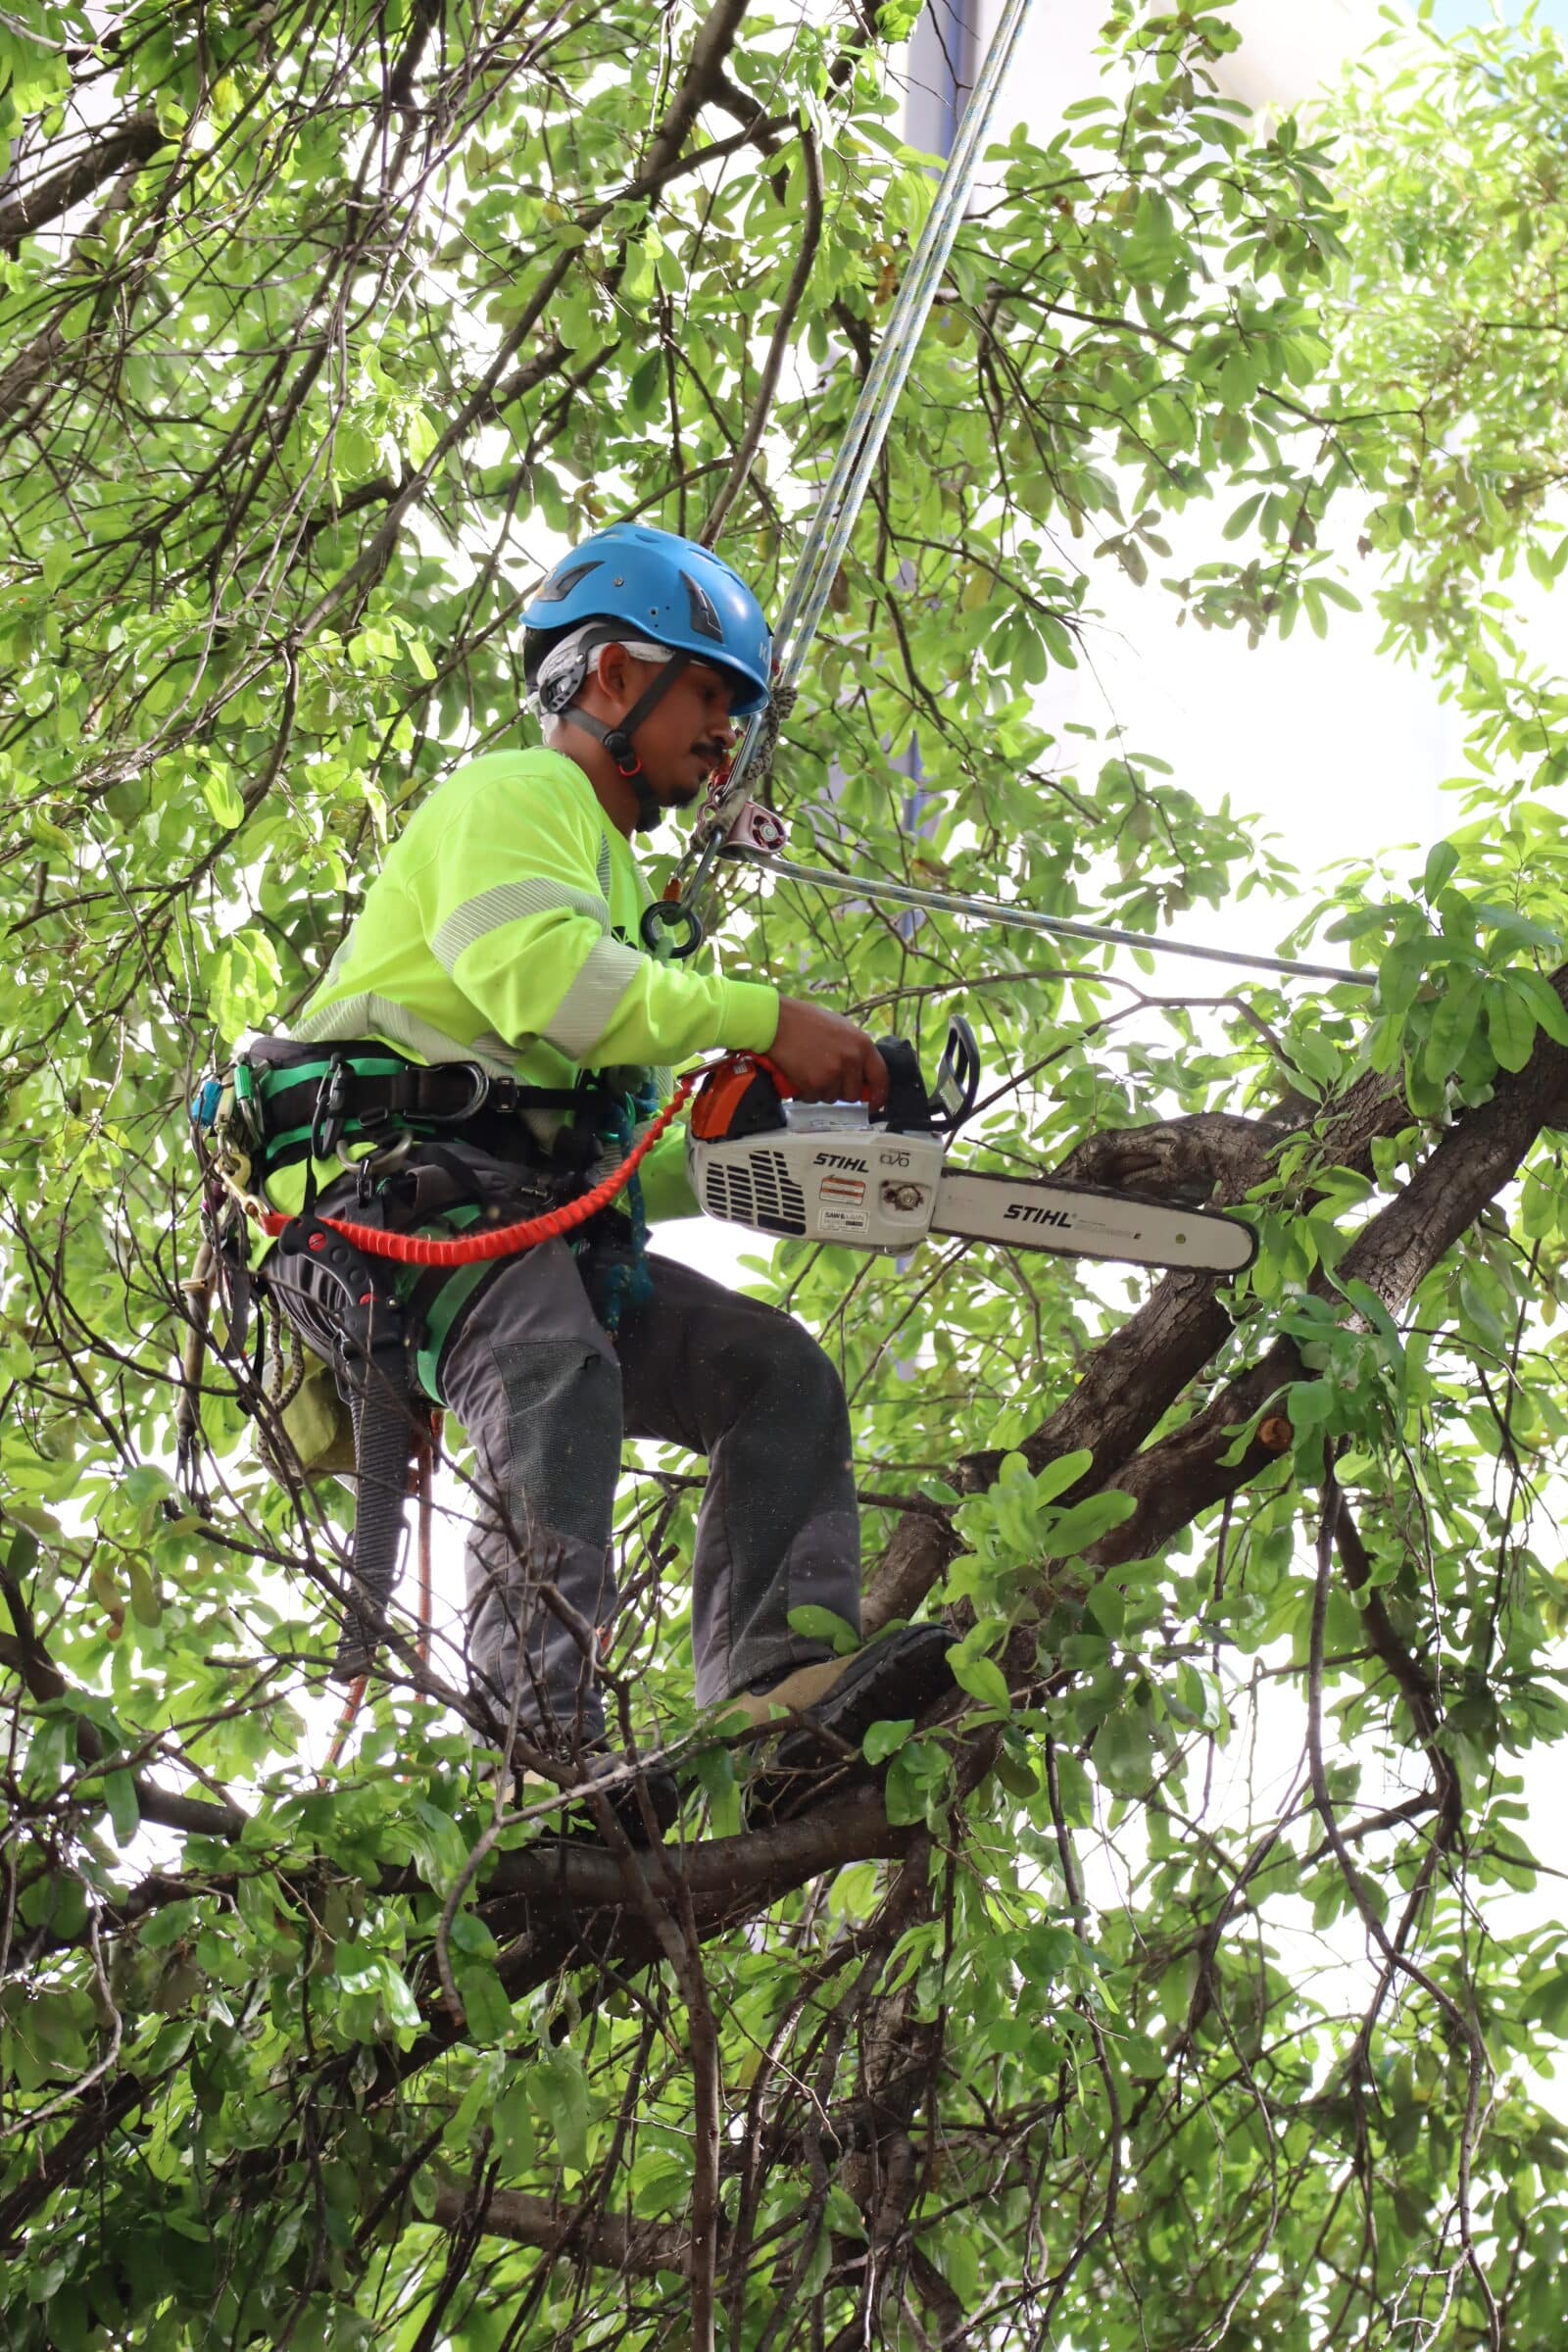 A landscaping professional at Southern Botanical is in a tree with a saw performing tree pruning & trimming while wearing a safety harness & safety helmet with a bright yellow uniform.